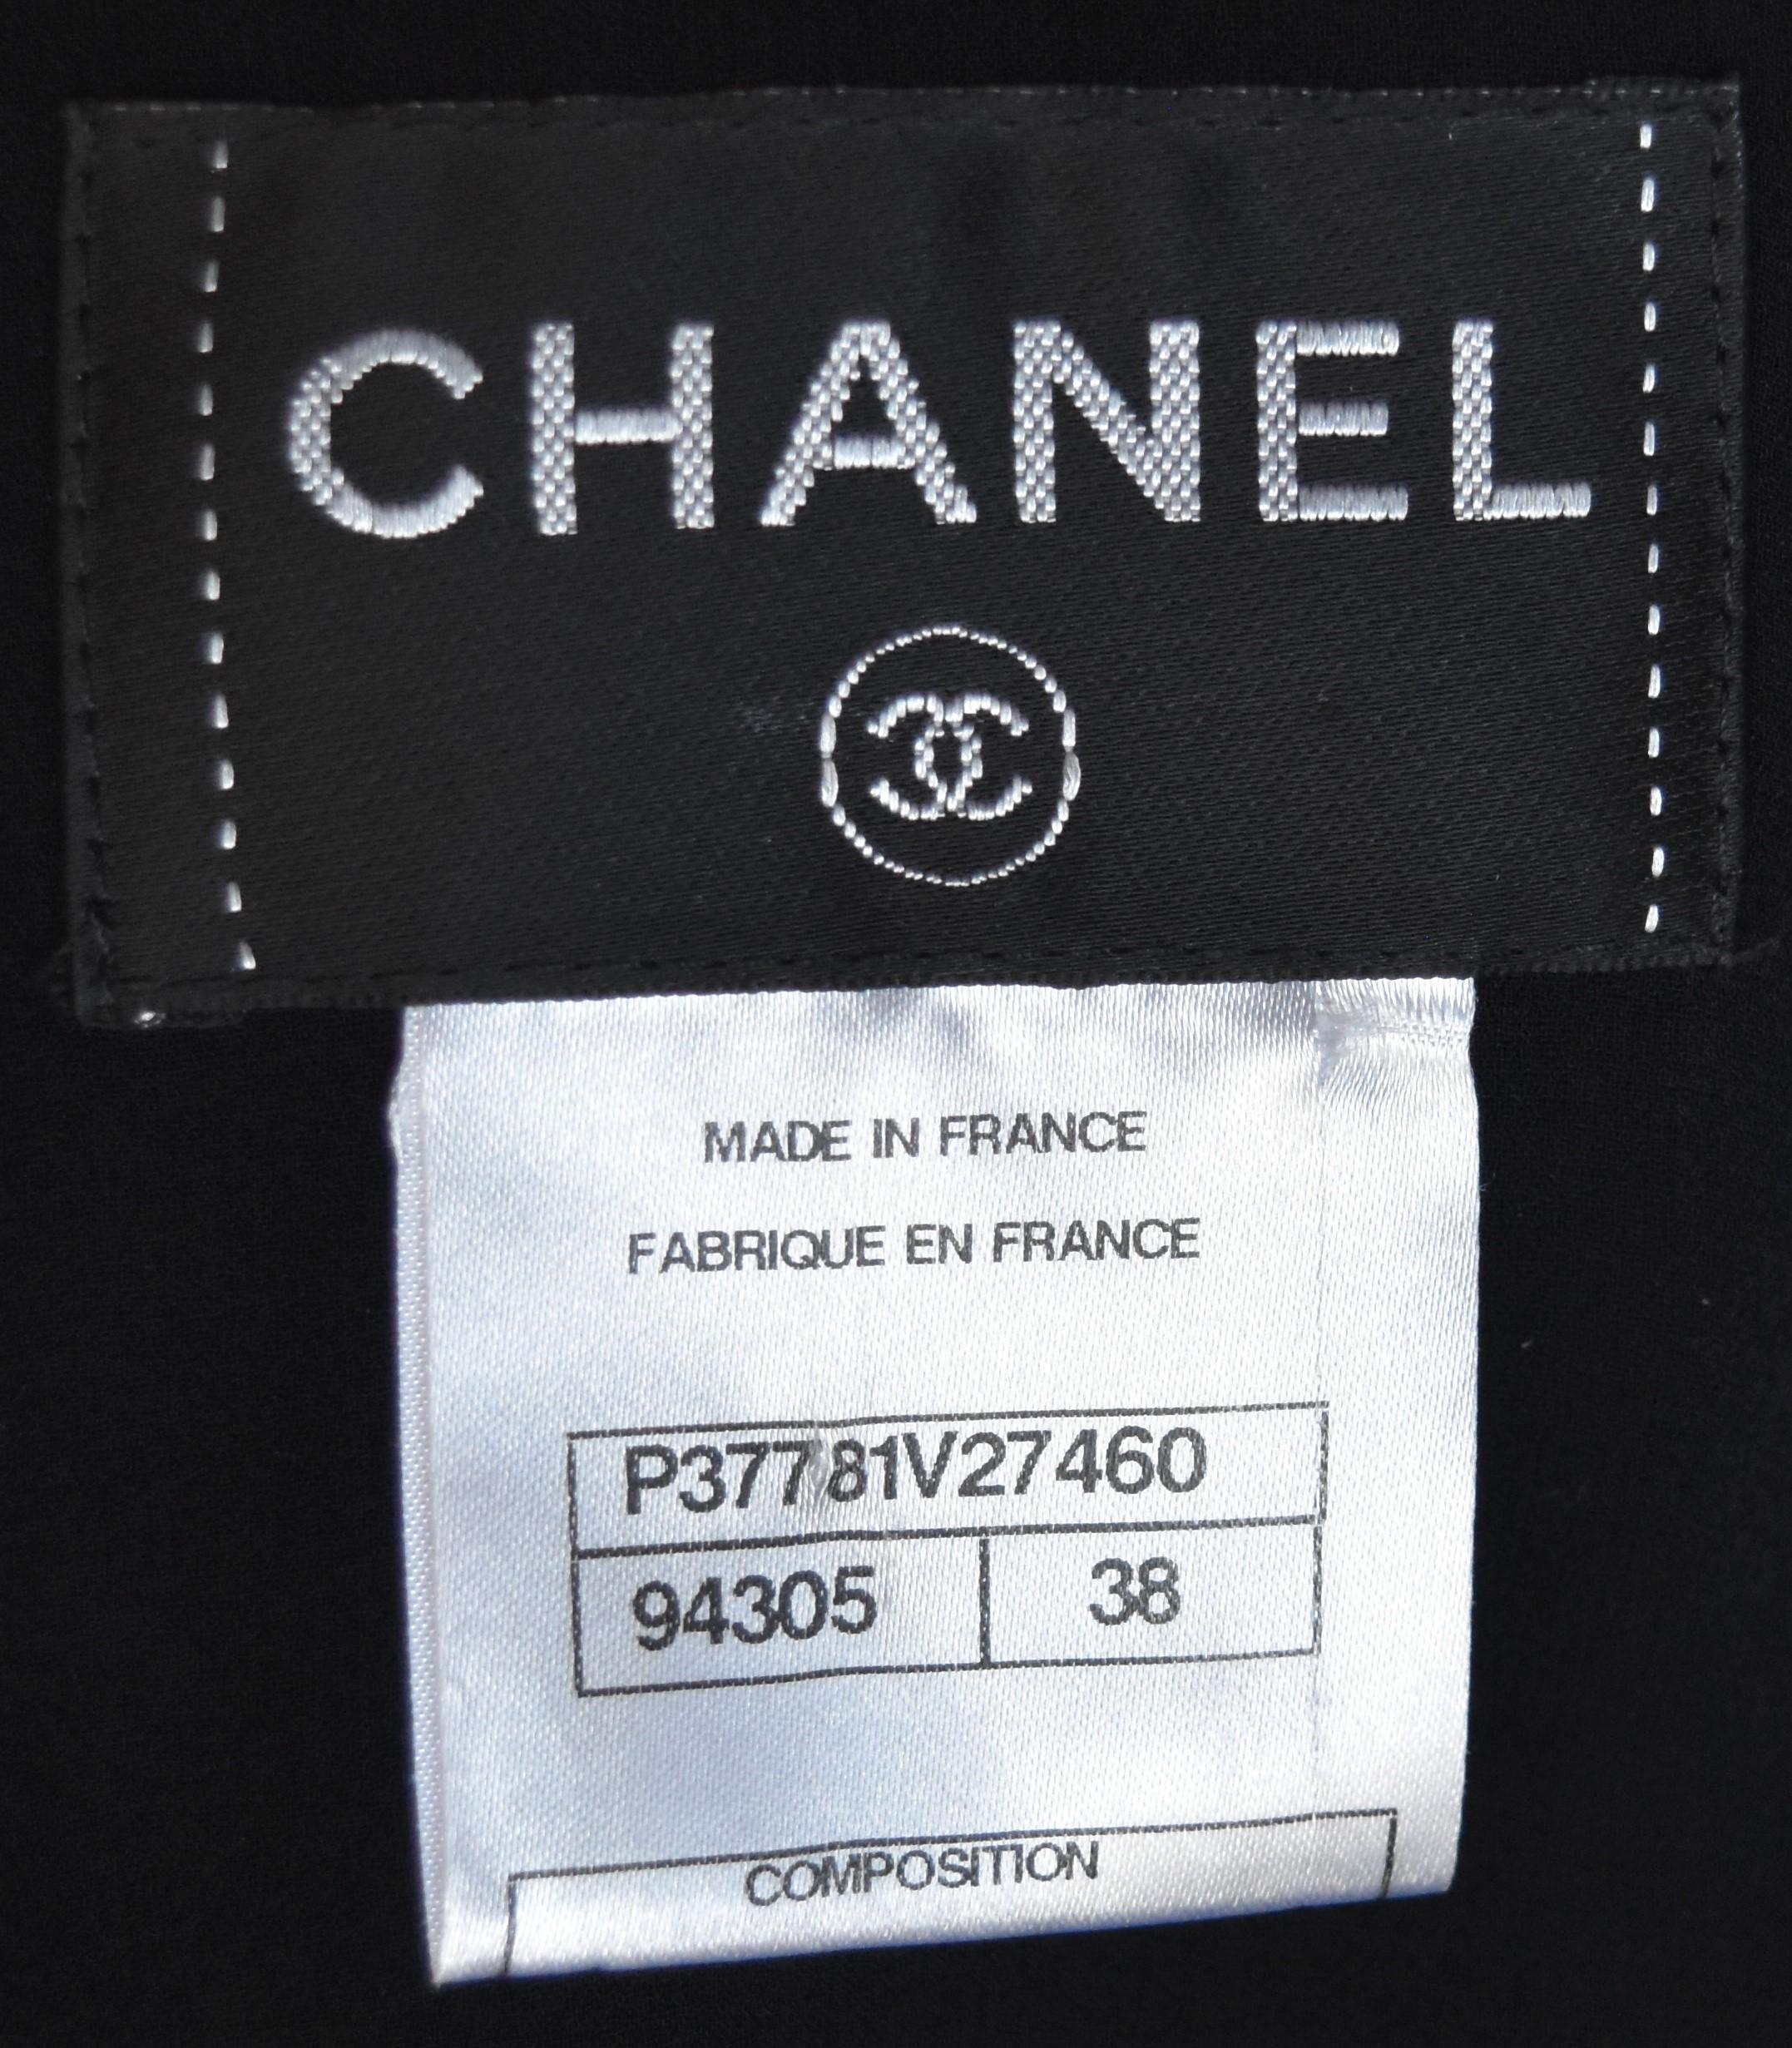 Chanel Faux Pearl Embellished Lace Dress 38 New For Sale 1